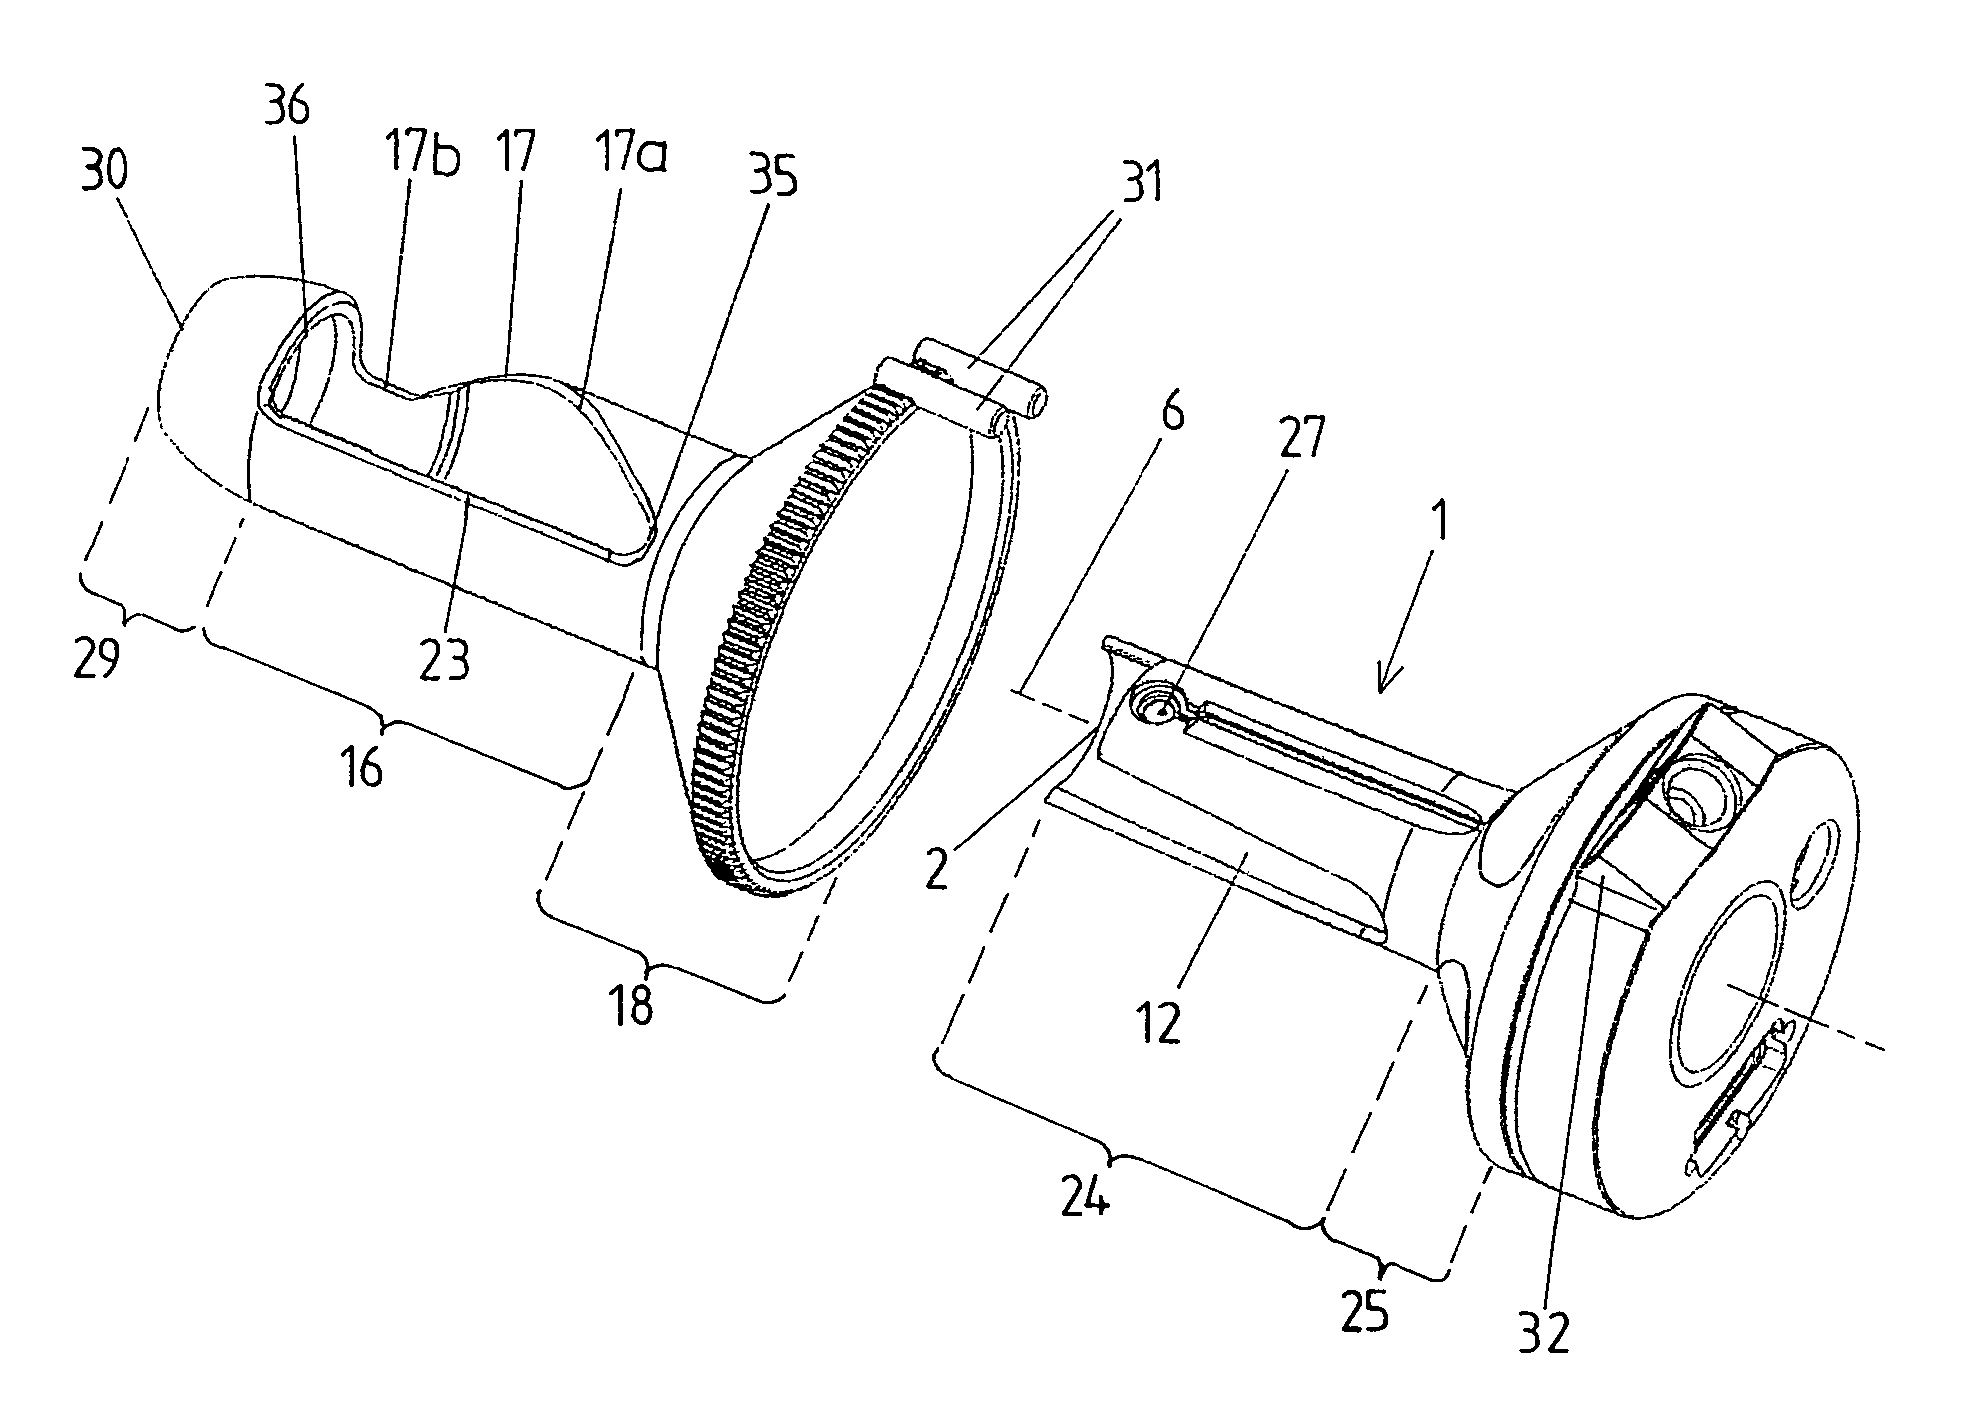 Instrument for use in the treatment of prolapsed hemorrhoids